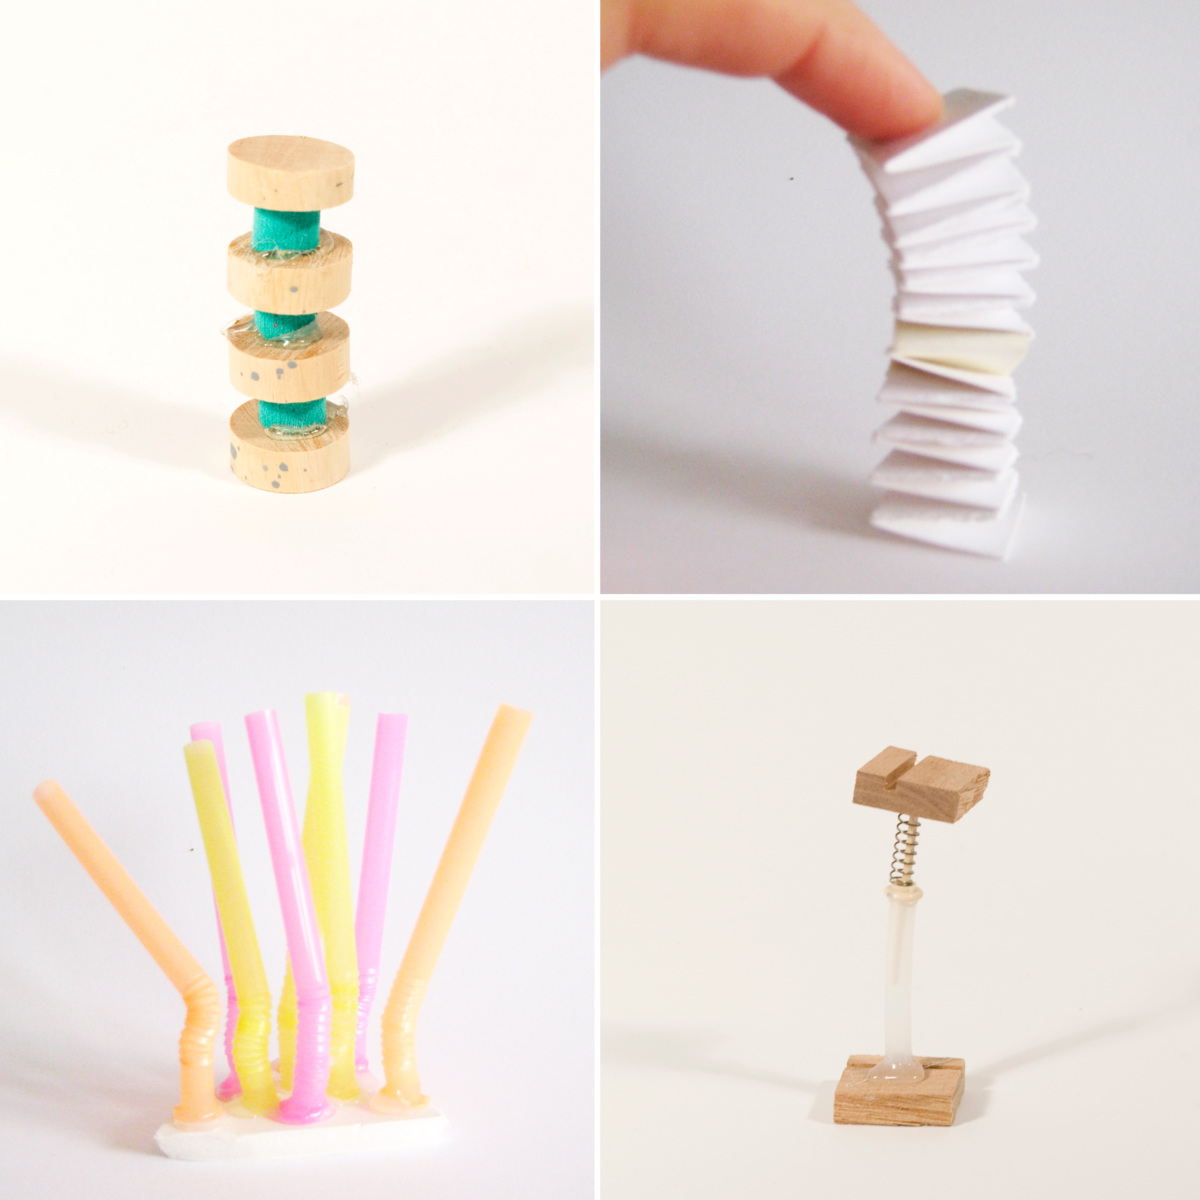 Four movement models using paper, springs, foam, and bendy straws.